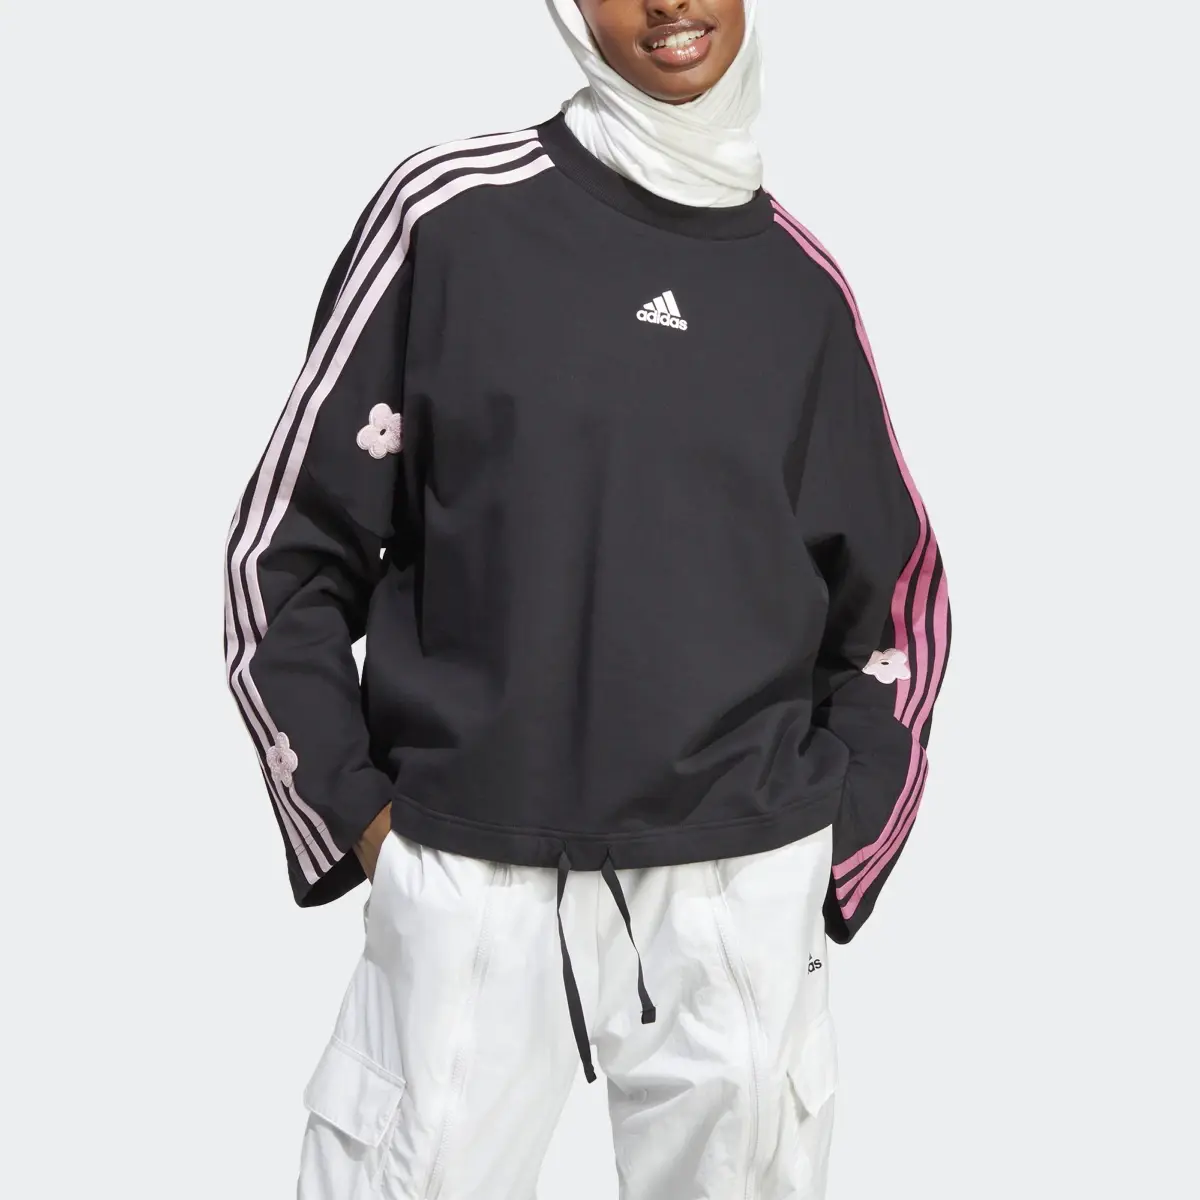 Adidas 3-Stripes Sweatshirt with Chenille Flower Patches. 1